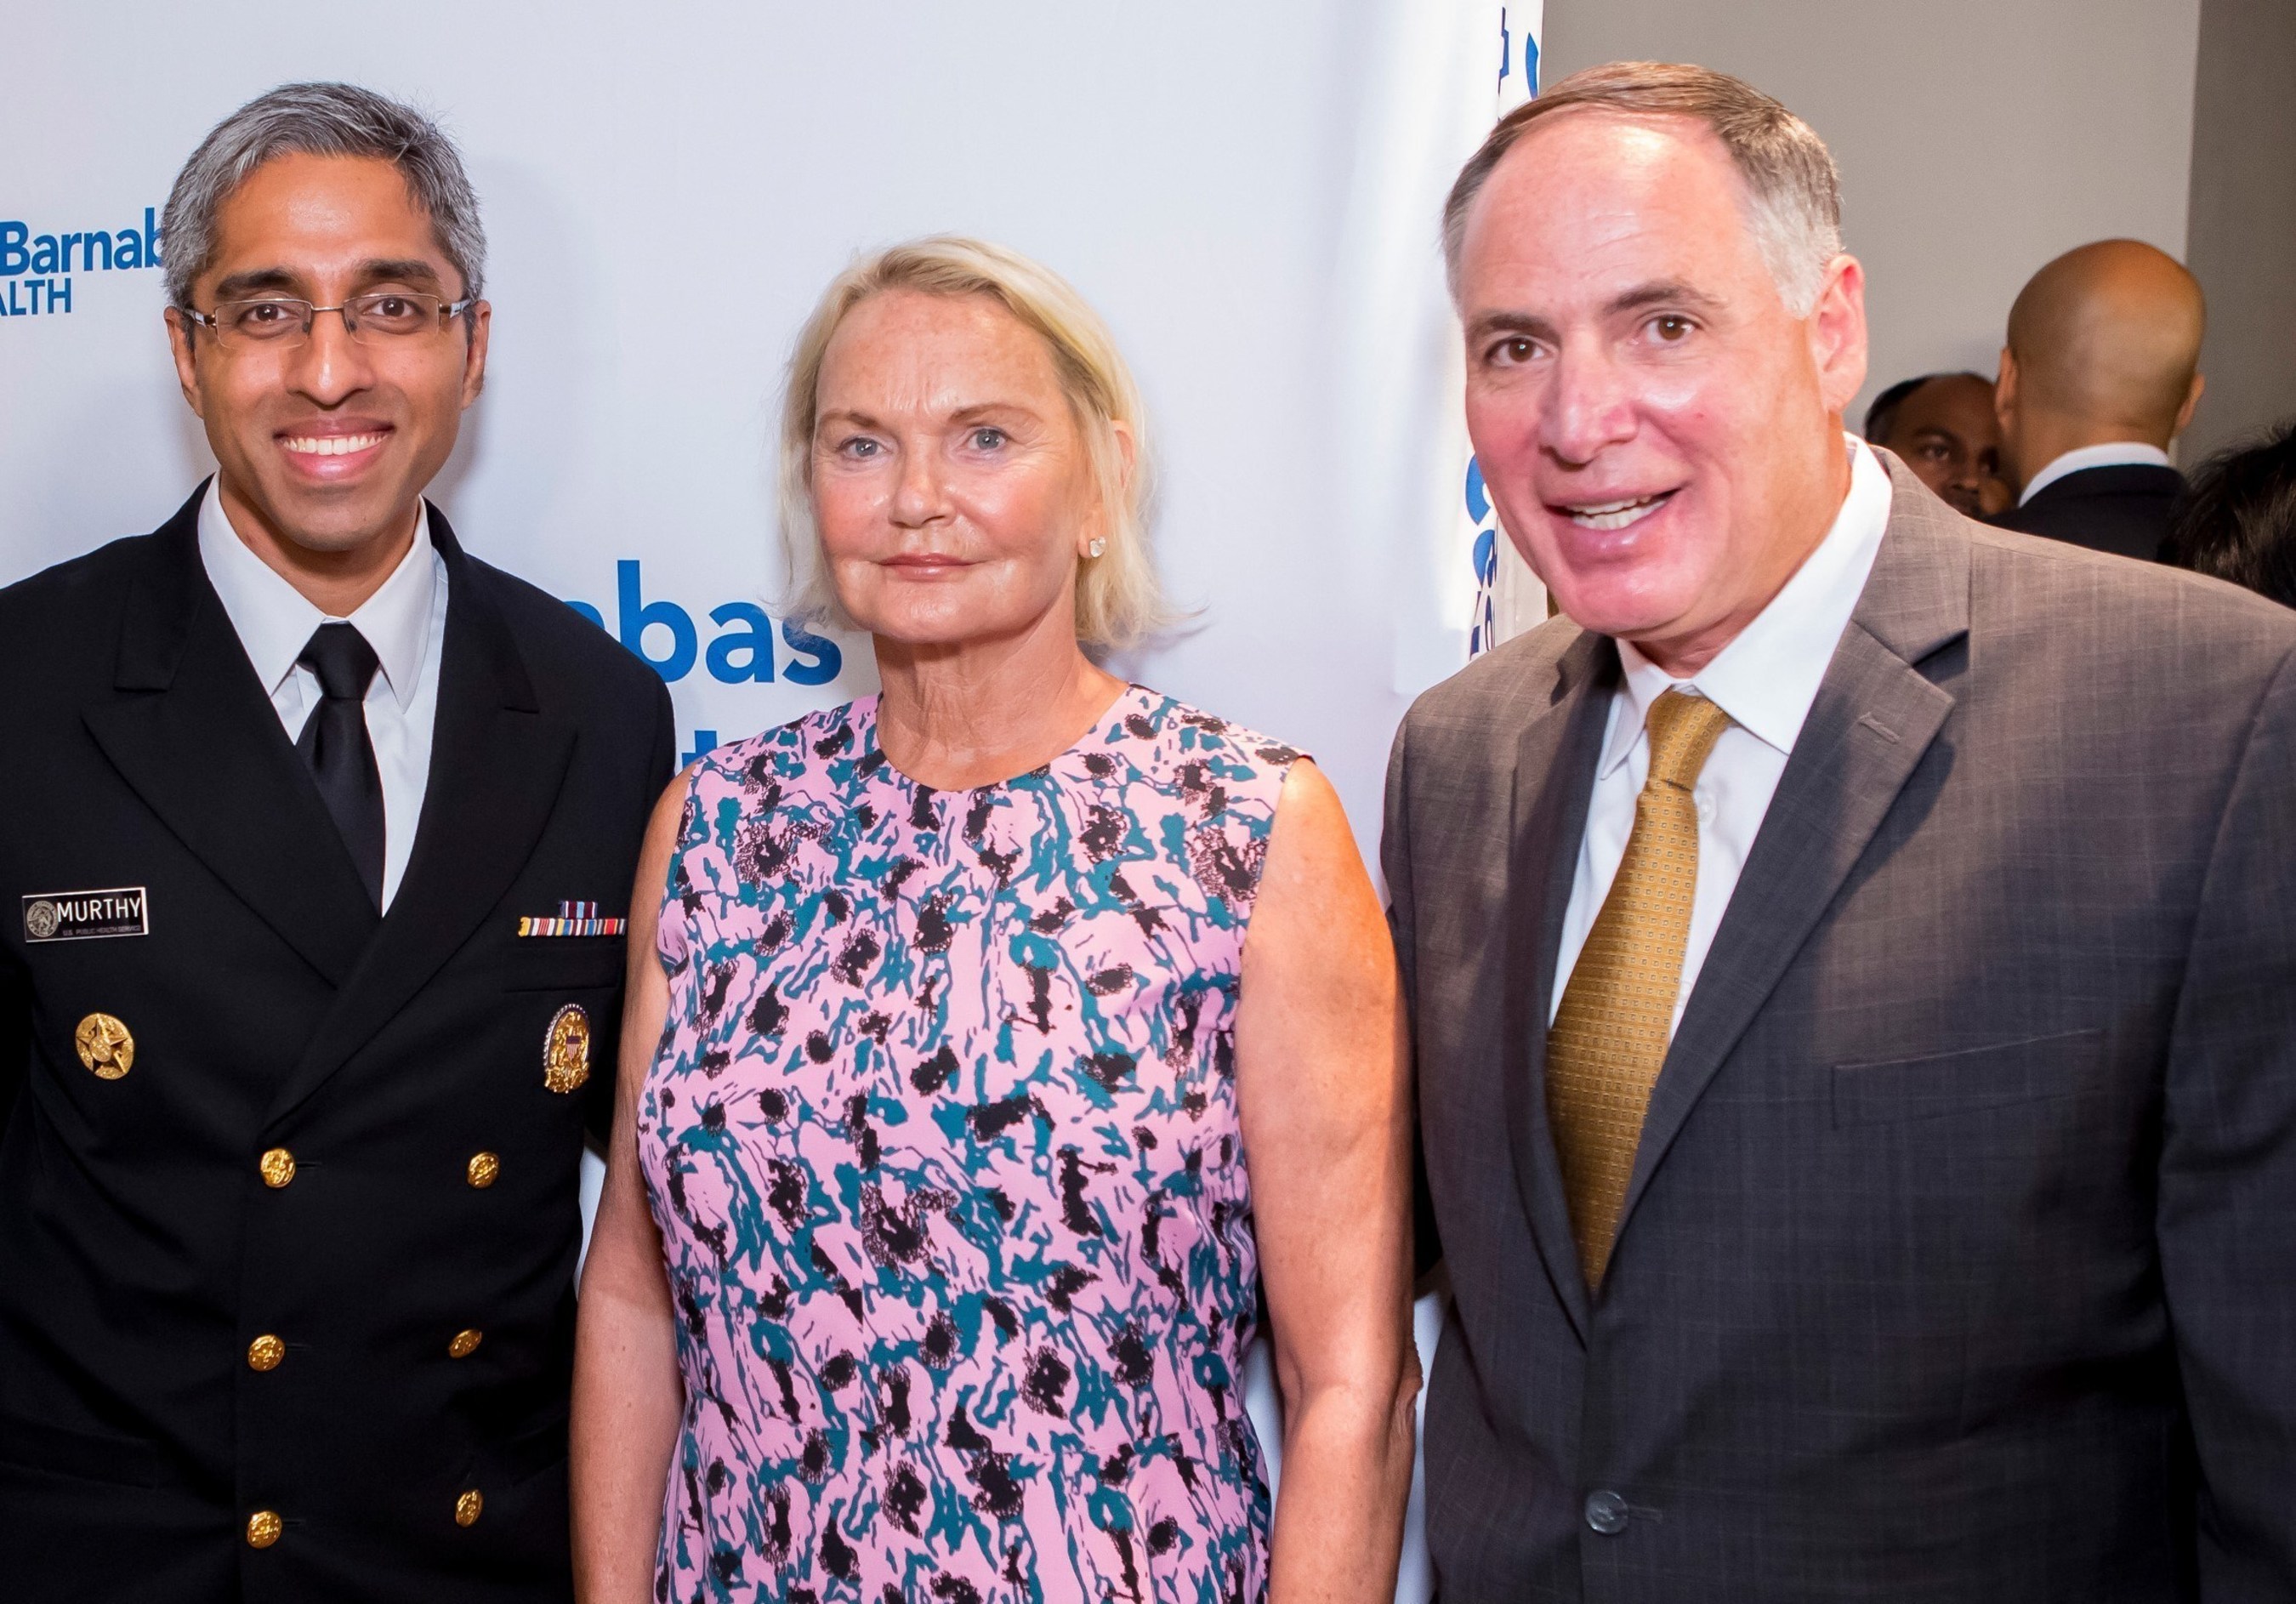 (l-r) U.S Surgeon General Vivek Murthy, Partnership for a Drug-Free New Jersey Chairwoman Elaine Pozycki and Executive Director Angelo Valente, discuss Vivek's plan to issue the first ever Surgeon General's report on Addiction and Health.